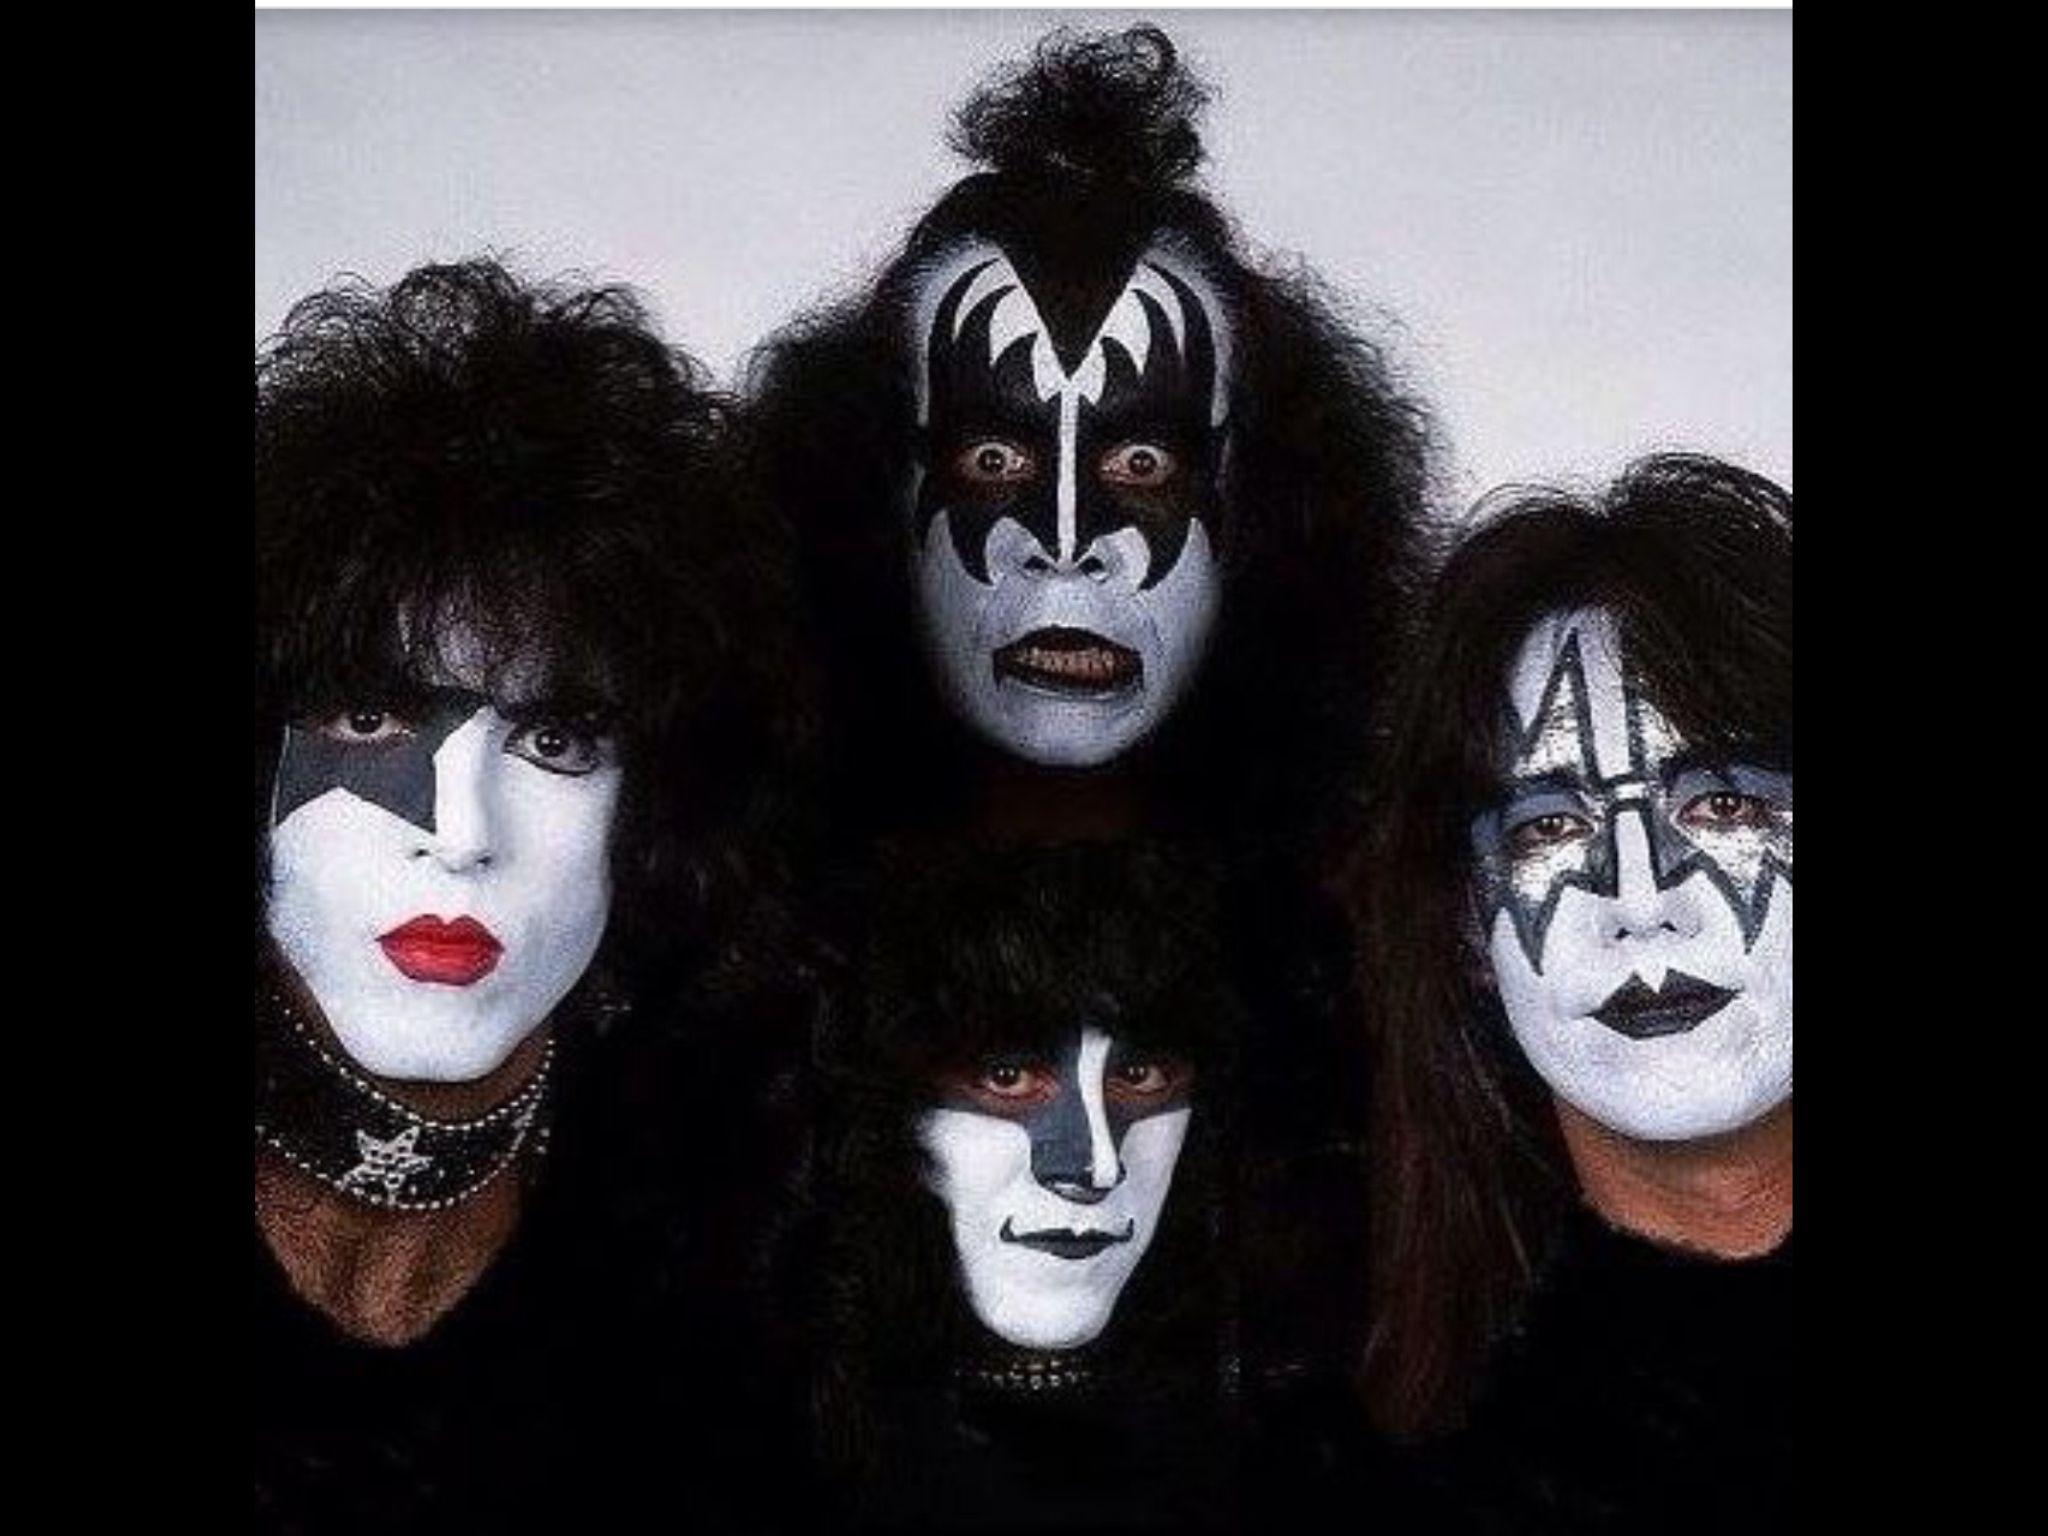 Paul Stanley, Gene Simmons, Ace Frehley, Eric Carr. Kiss band